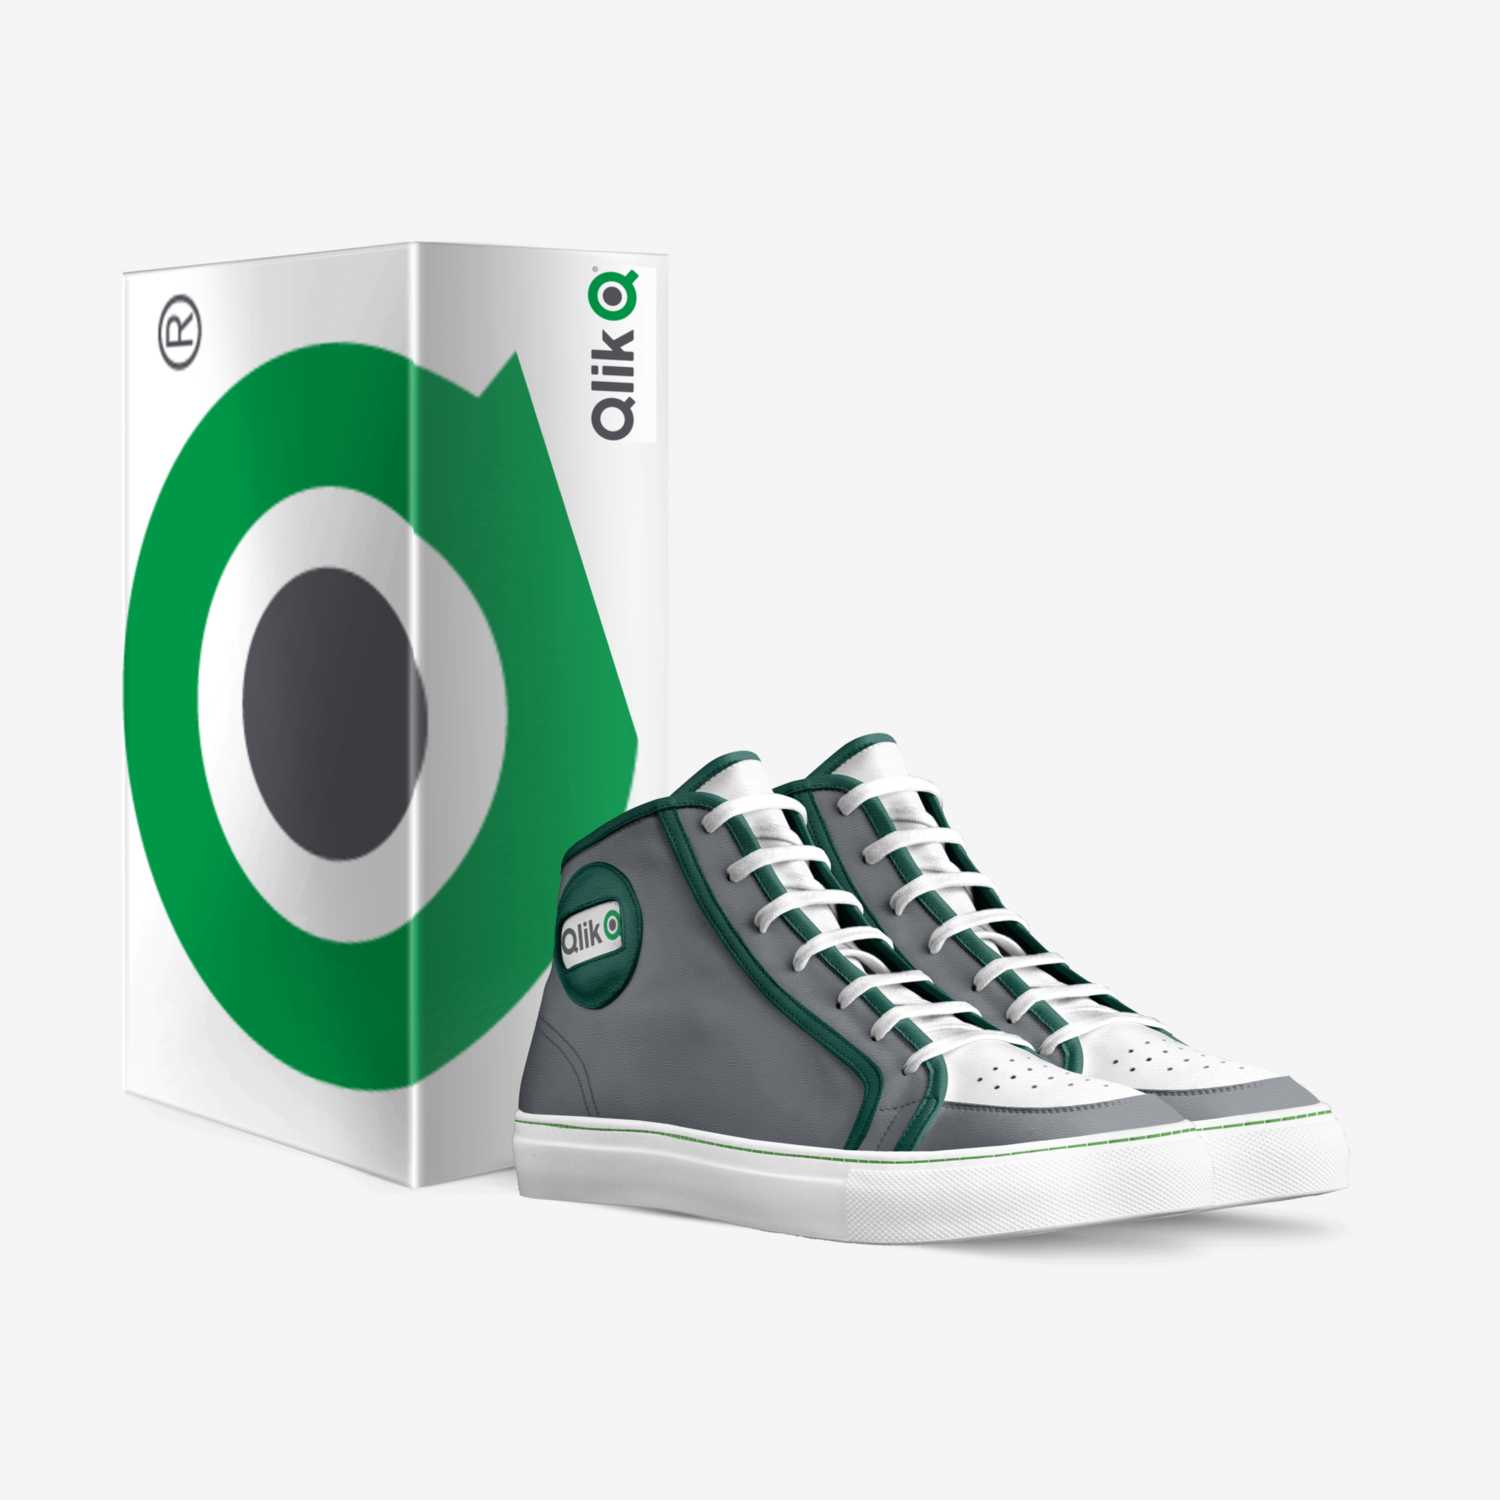 QlikTech II custom made in Italy shoes by Chavez Mckee | Box view